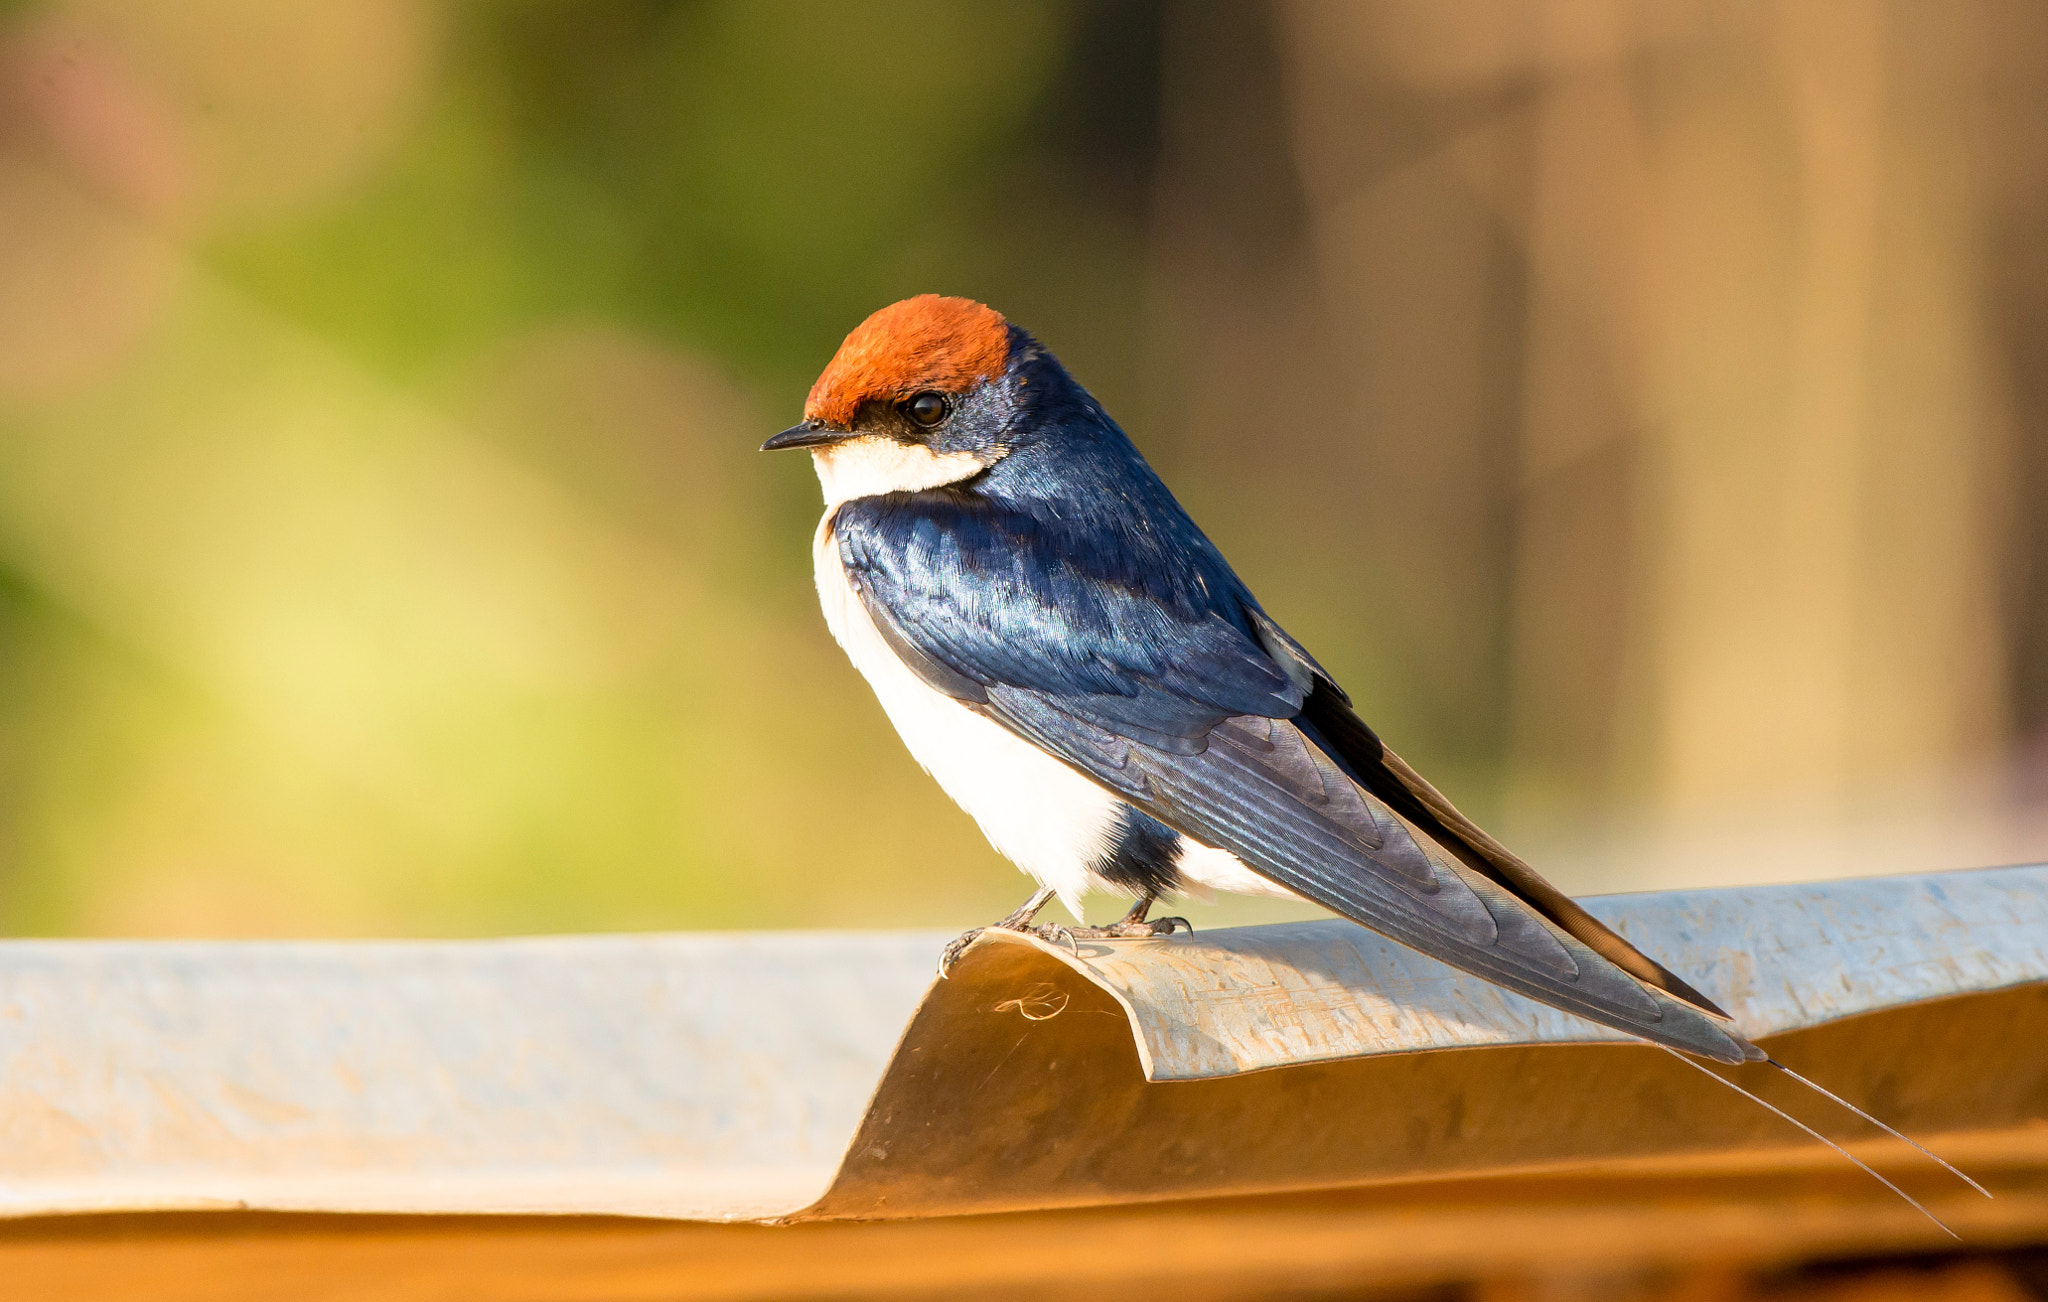 Nikon D7100 sample photo. Wire-tailed swallow photography